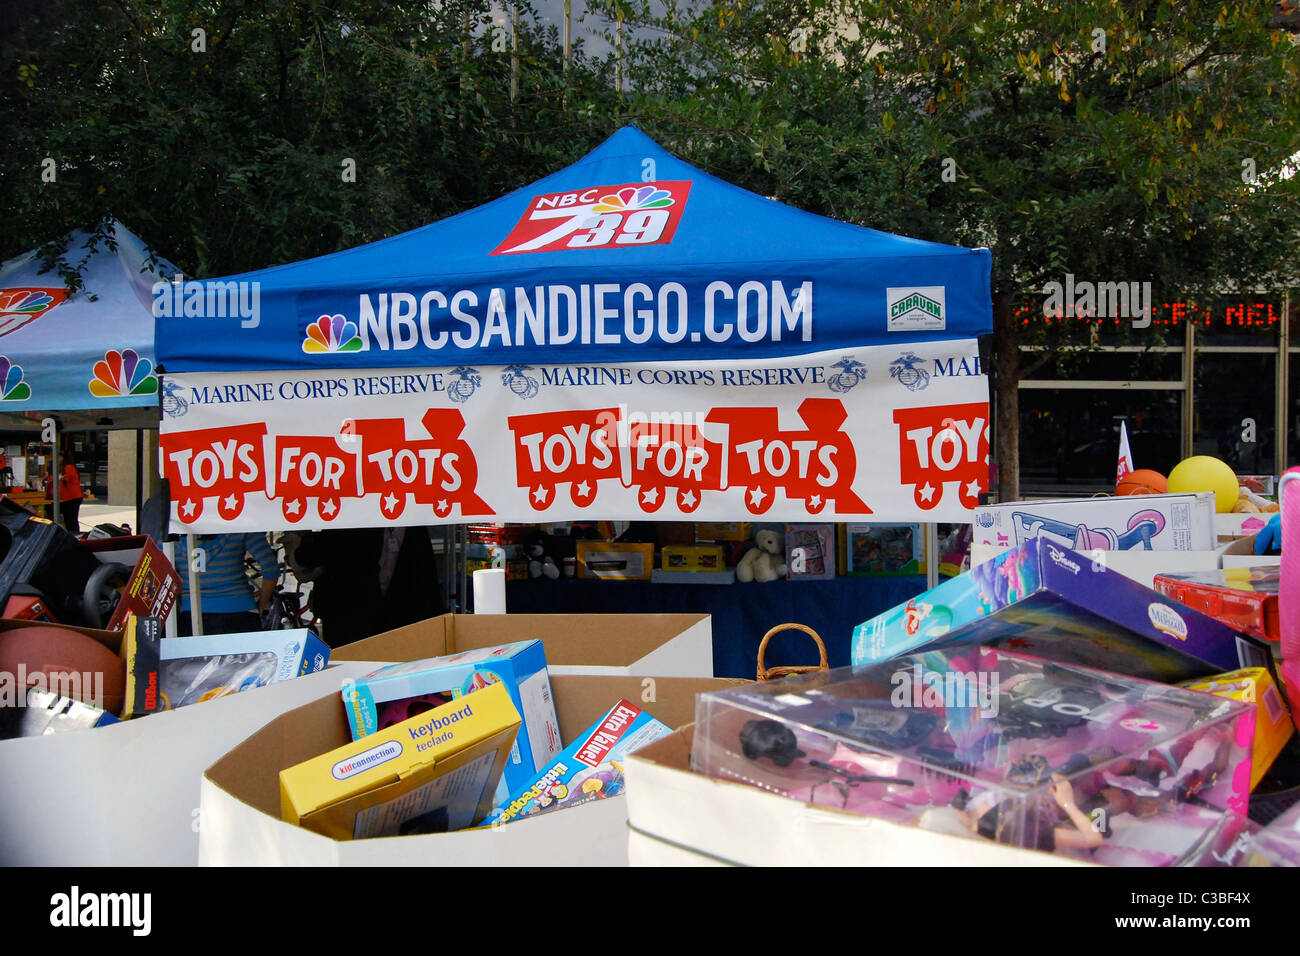 Deal Or No Deal' host Howie Mandel helps out at Toys For Tots Campaign KNSD's annual Toy Drive at NBC studios San Diego, Stock Photo